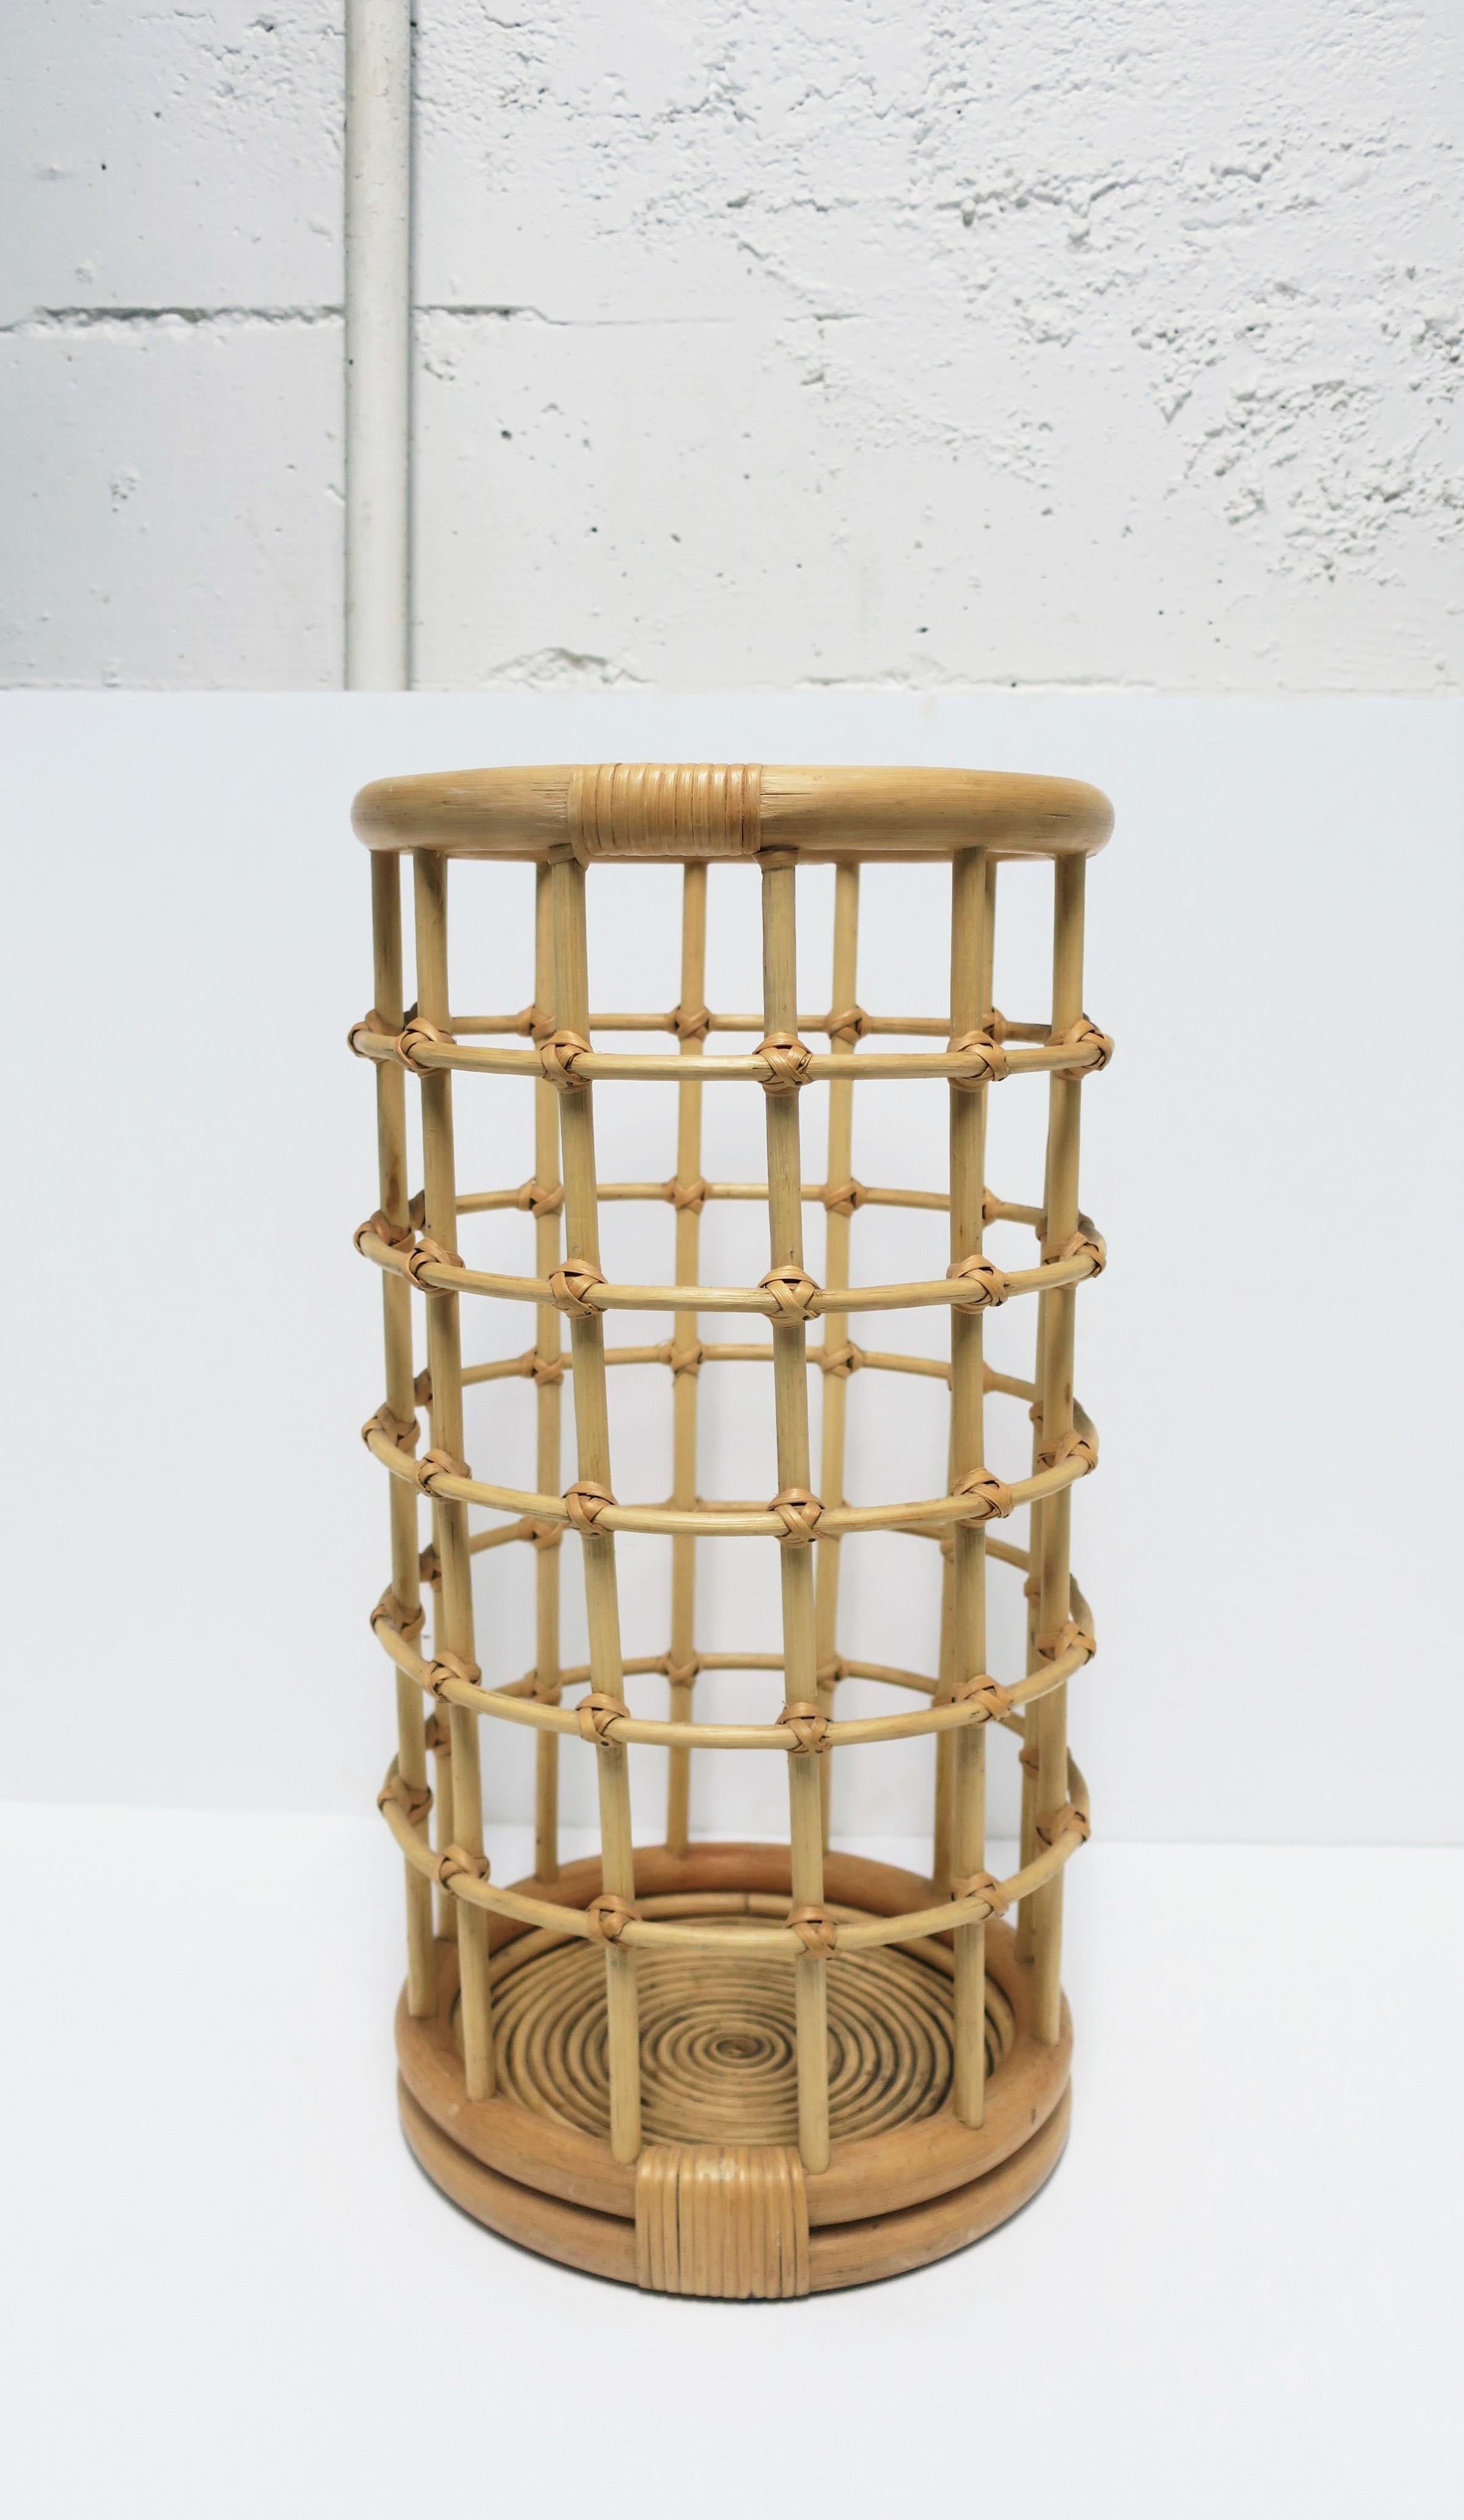 A vintage wicker rattan bentwood blond umbrella stand holder with geometric design, circa late-20th century. A rattan construction with wicker knots. Dimensions: 11.25